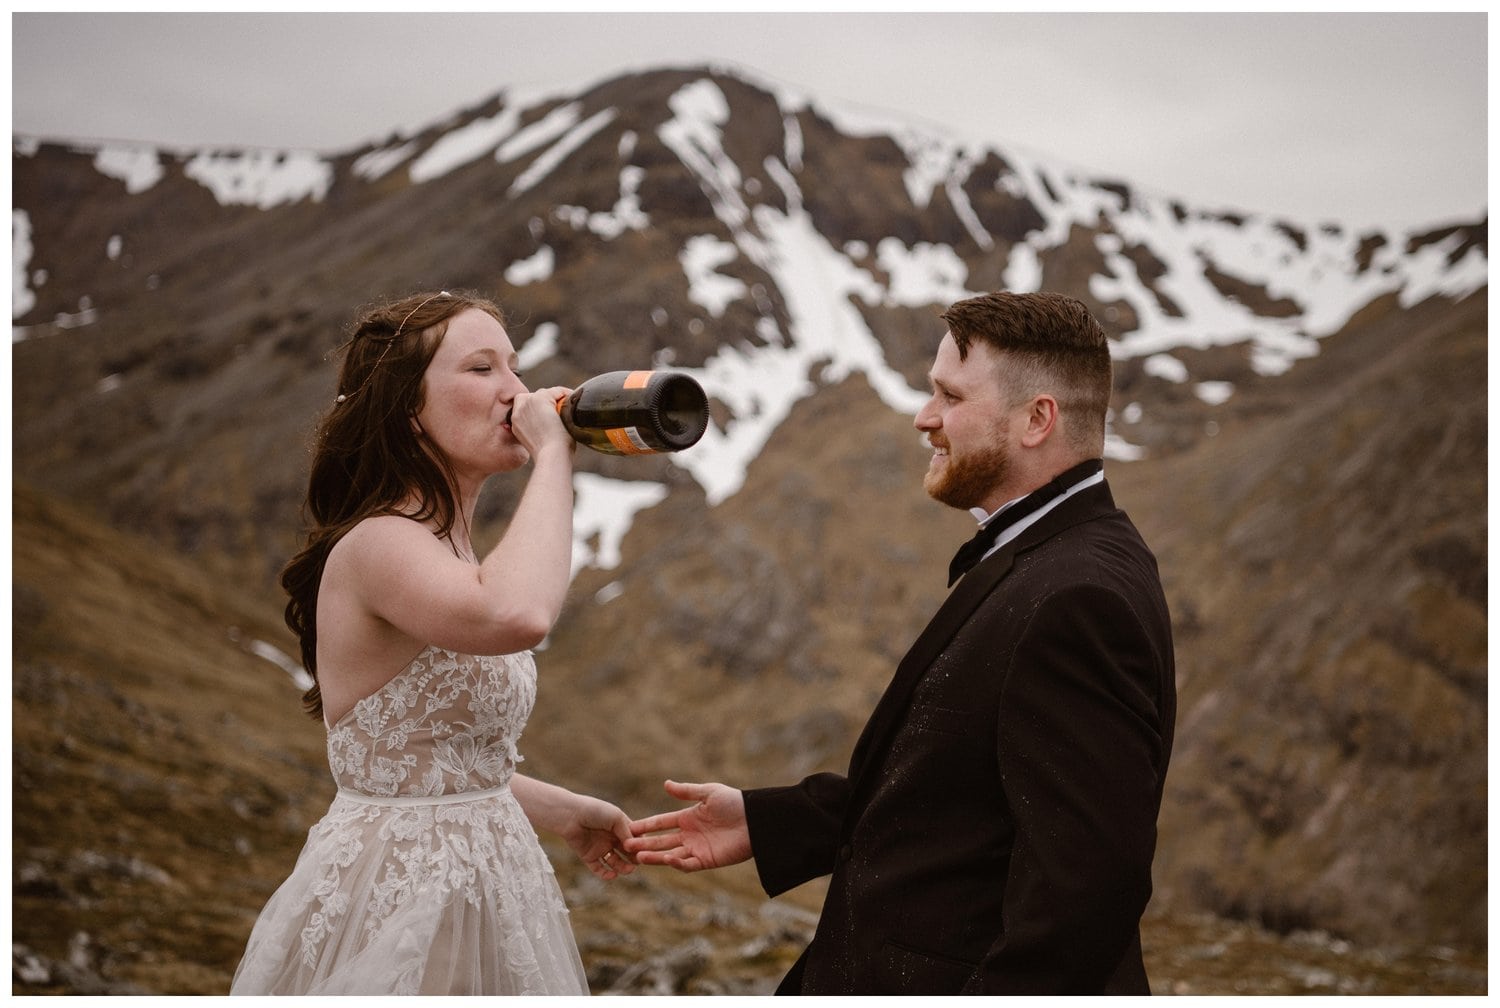 Bride and groom drink champagne on their elopement day in the Scottish Highlands.